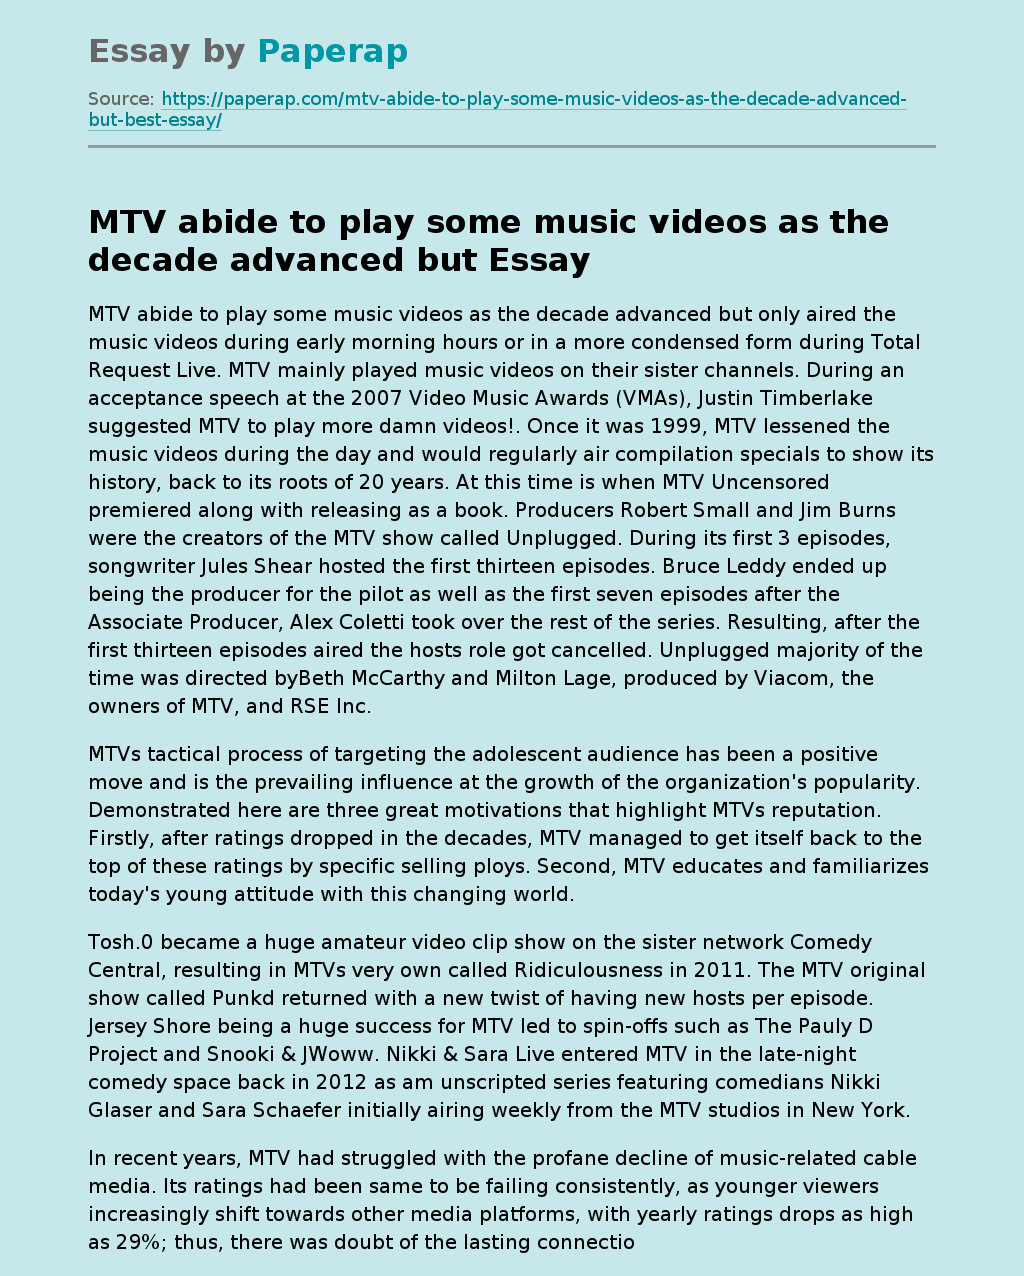 MTV abide to play some music videos as the decade advanced but